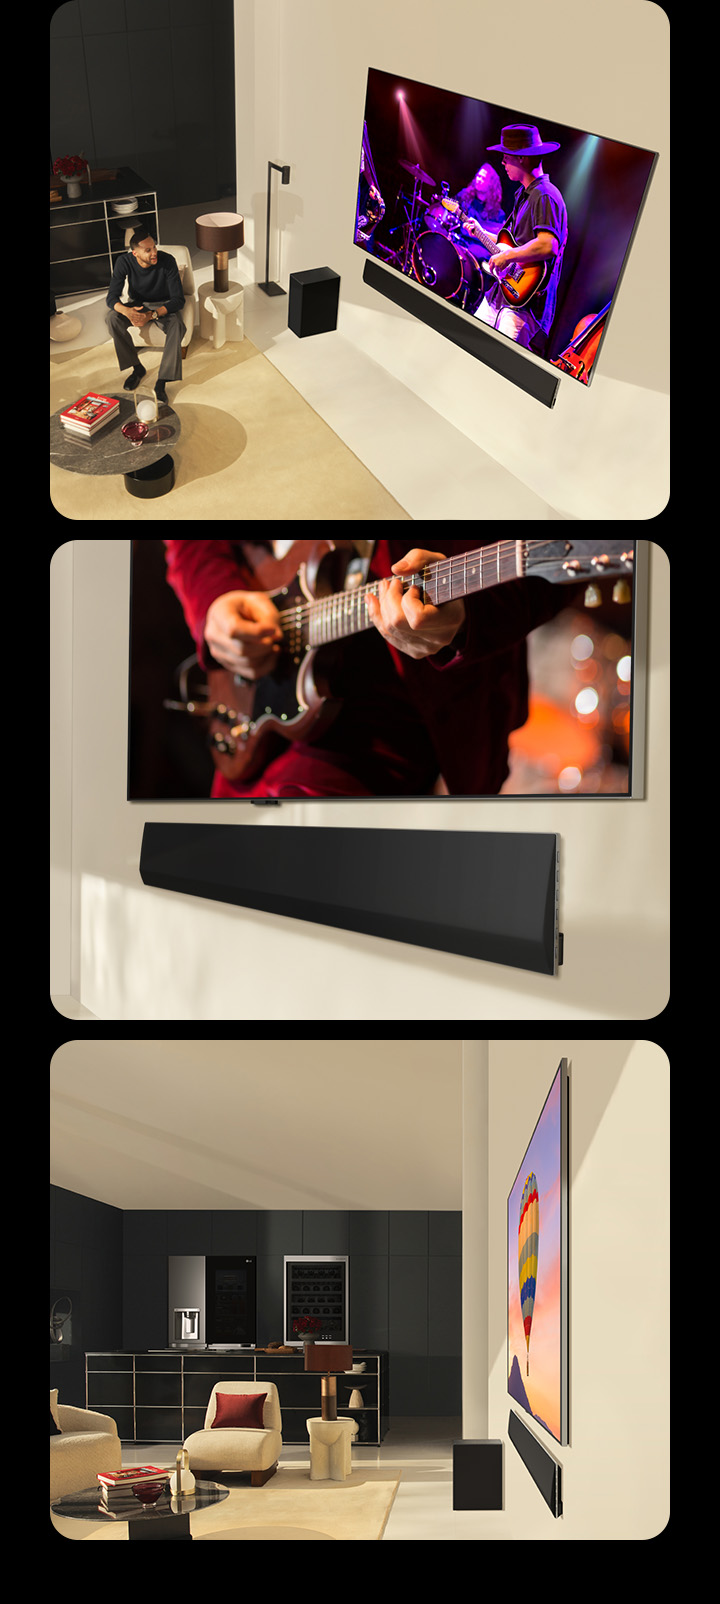 Three images are shown in sequence. Firstly, a couple watching a concert playing on an LG OLED evo G4 with the perfectly matching LG Soundbar USG10TY in a modern living space, while a same image with a man watching the TV is shown in mobile device. And the below, one shows an angled perspective of the bottom of an LG OLED TV and LG Soundbar. And the other shows a side profile view of an LG OLED evo G4 and LG Soundbar USG10TY, both with incredibly thin dimensions and virtually zero gap against the wall. 	